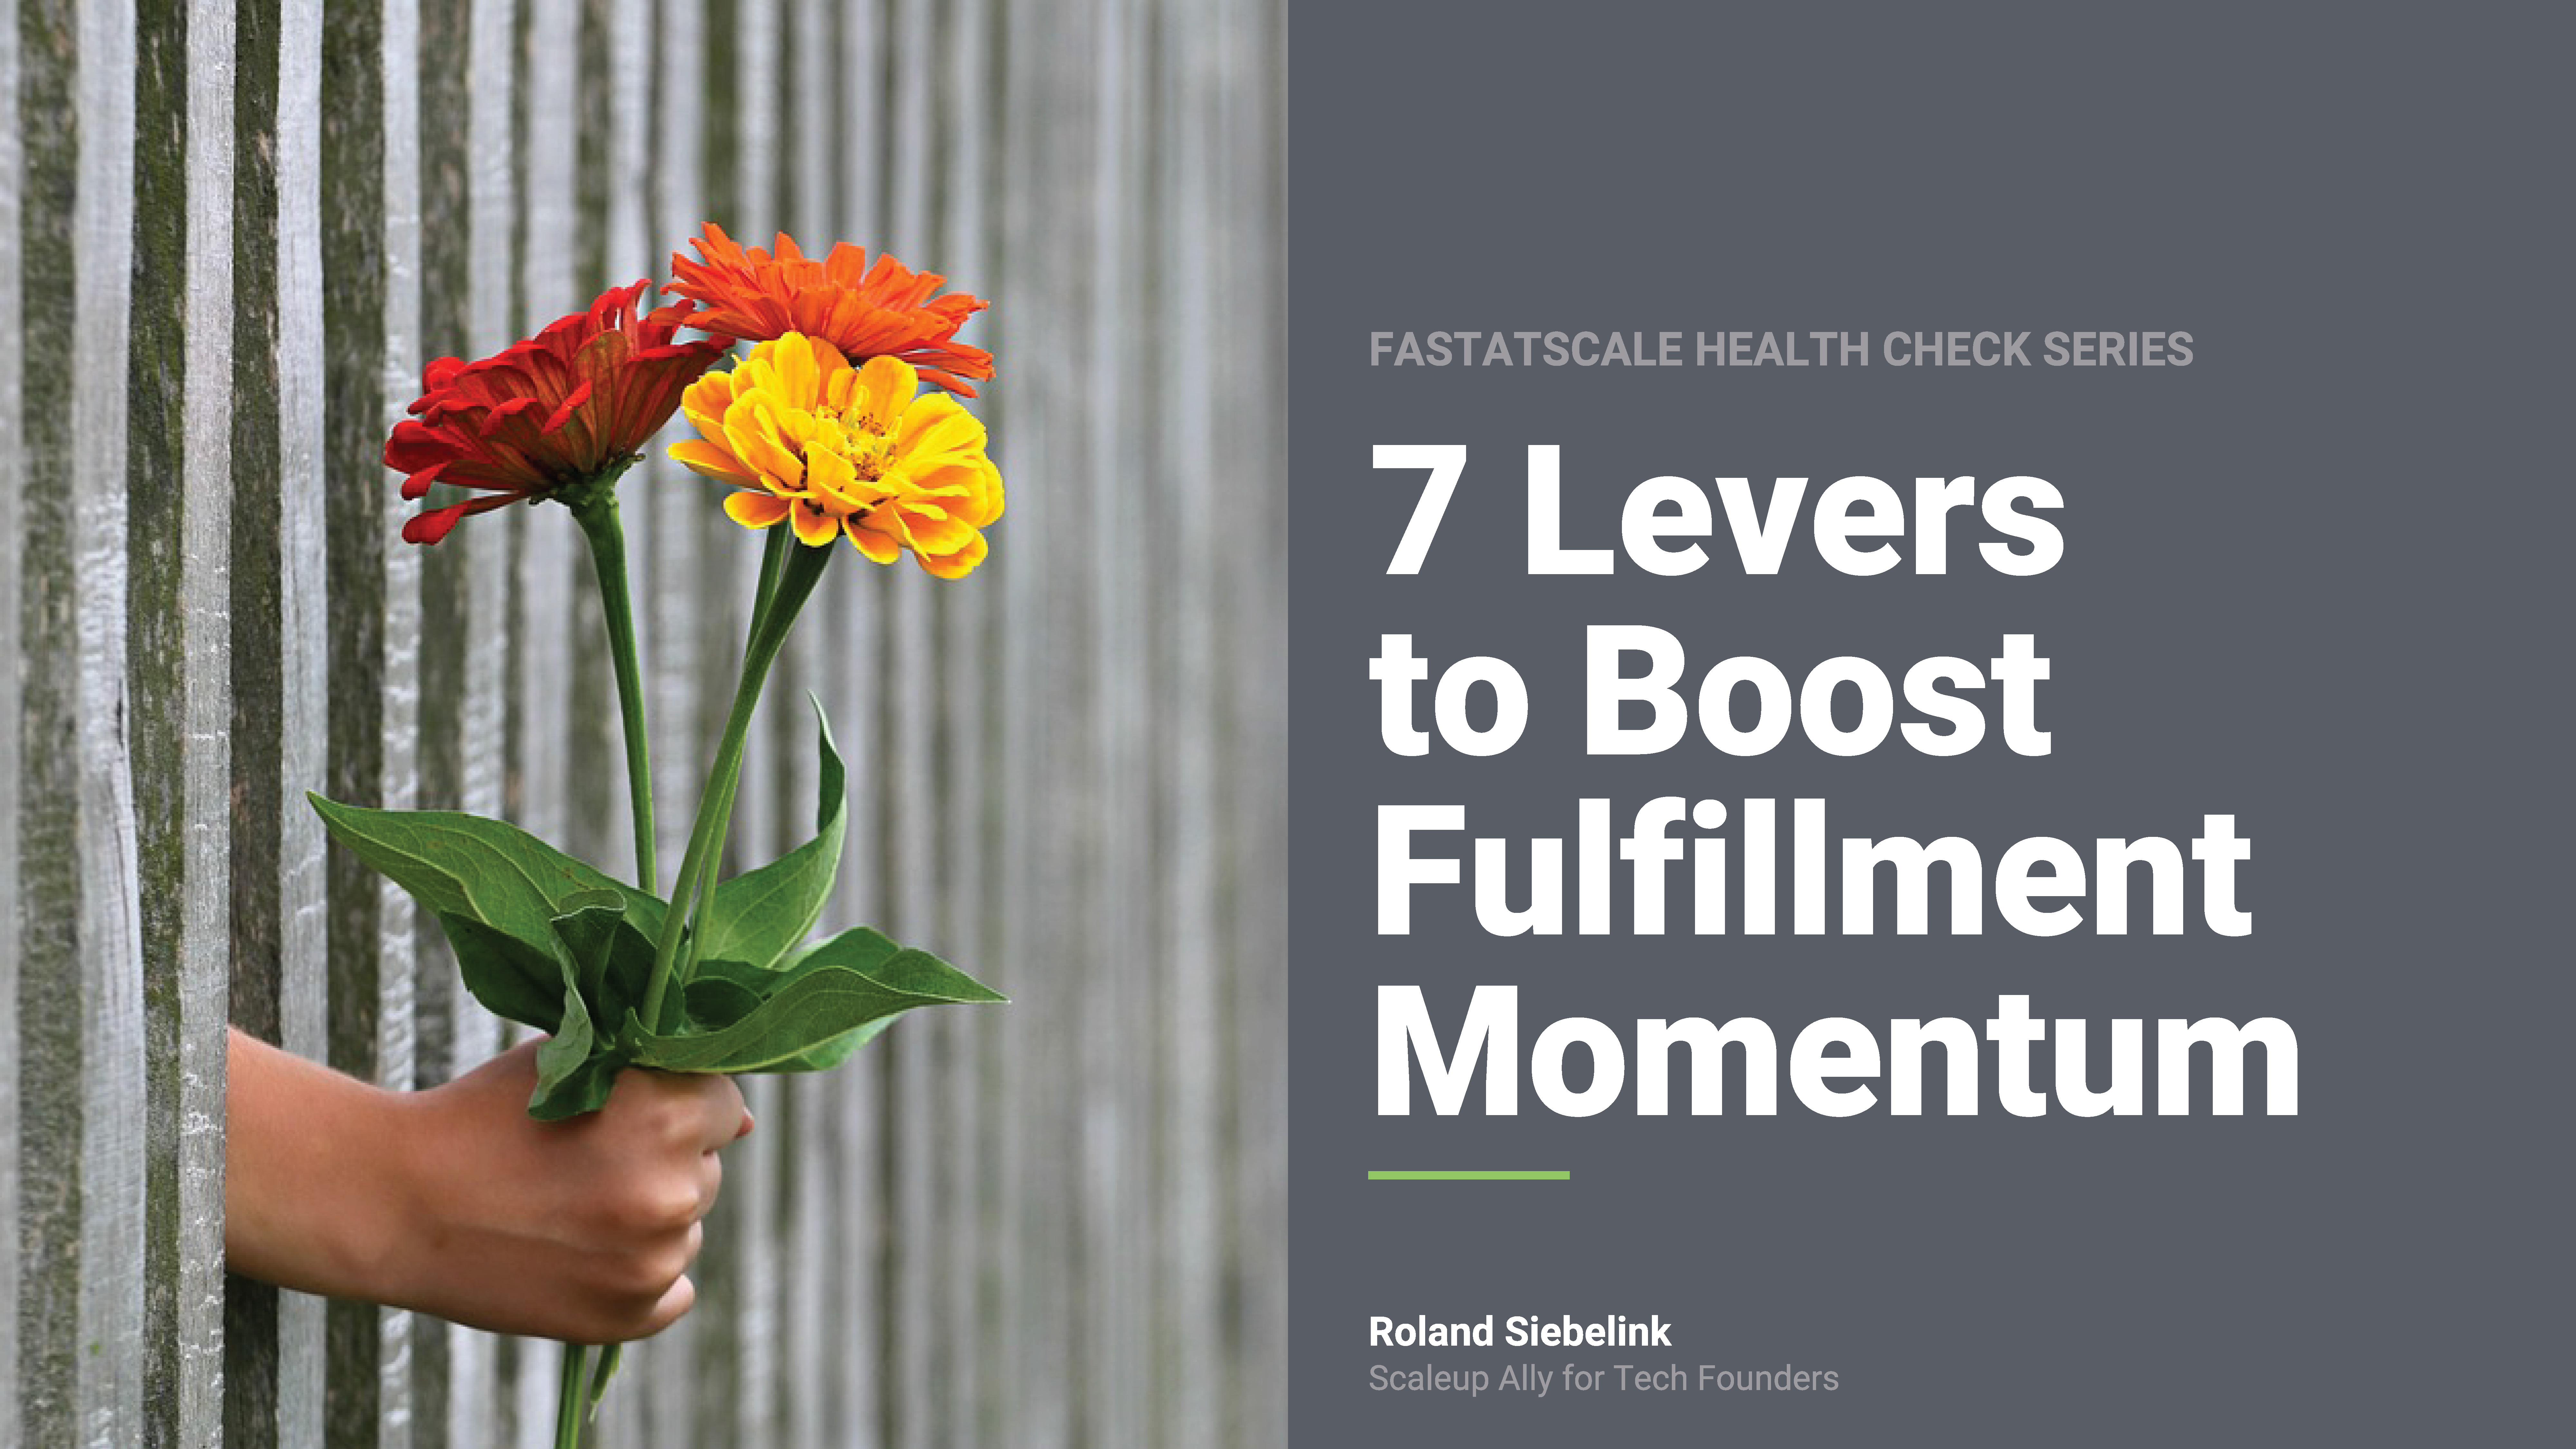 7 Levers to Boost Fulfillment Momentum 